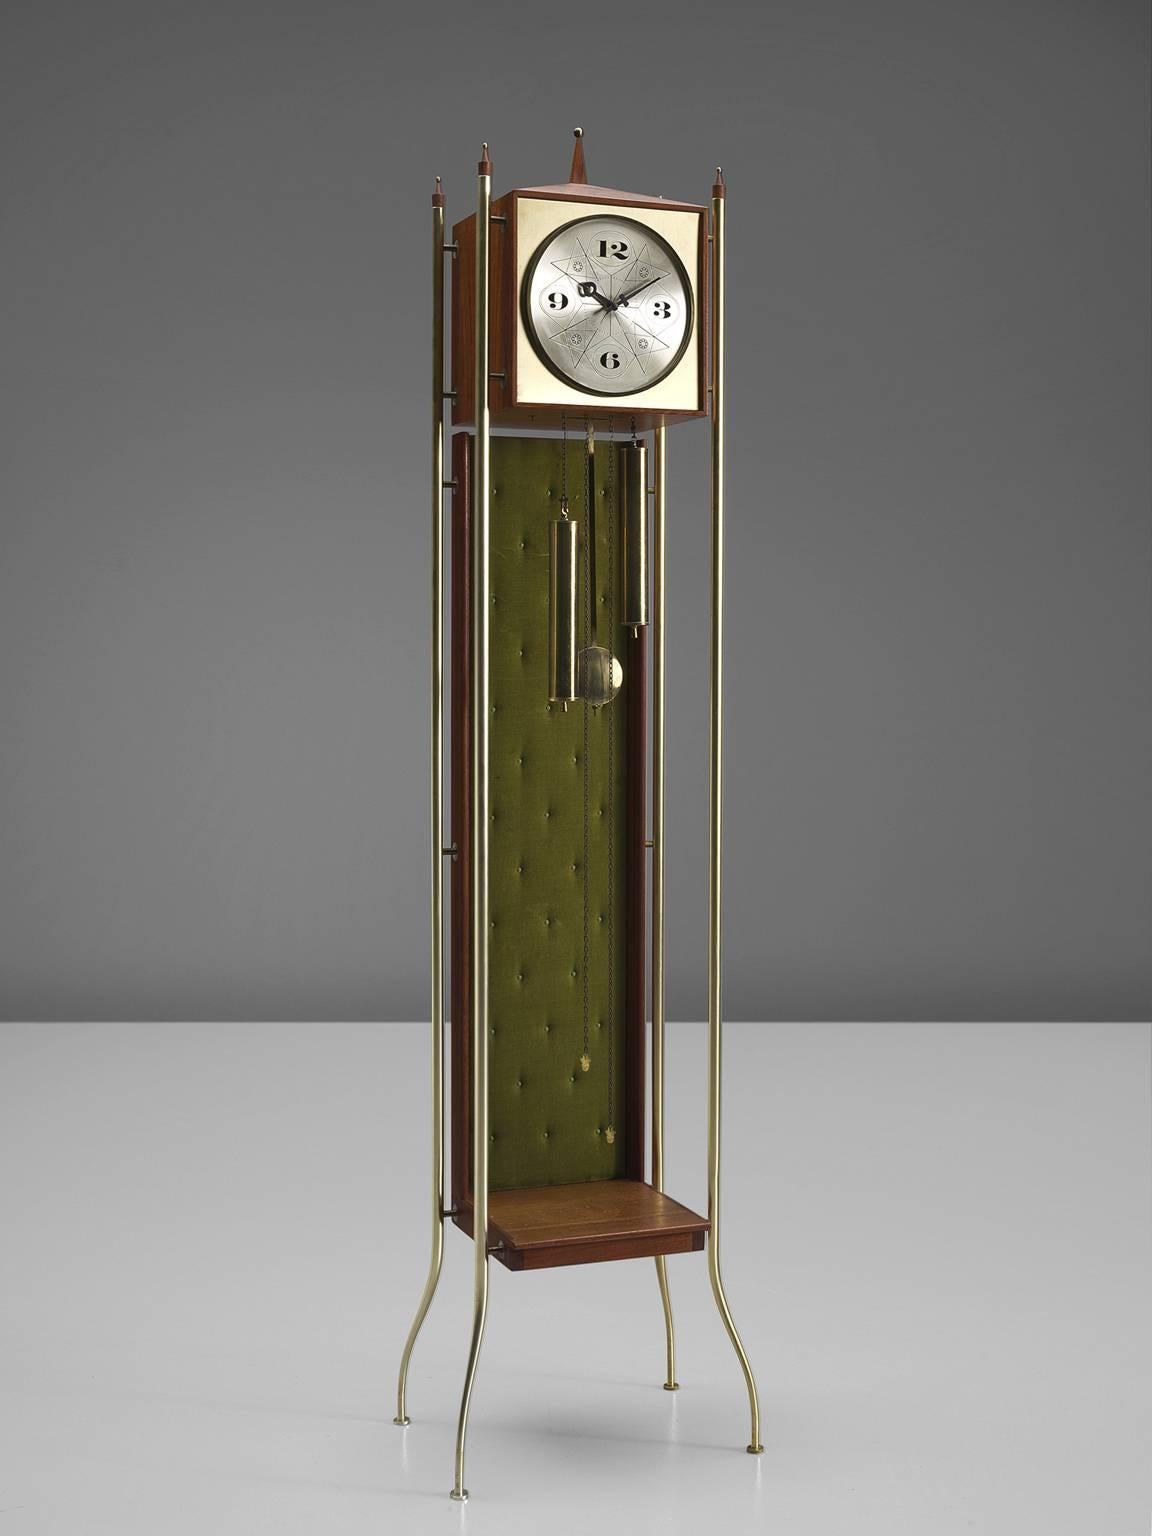 Grandfather clock, silver dial, black numerals and hands, teak wood with padded green velvet-covered background section, New York, 1957. 

This elegant grandfather clock by George Nelson is produced by Howard Miller.
The model is chain driven and